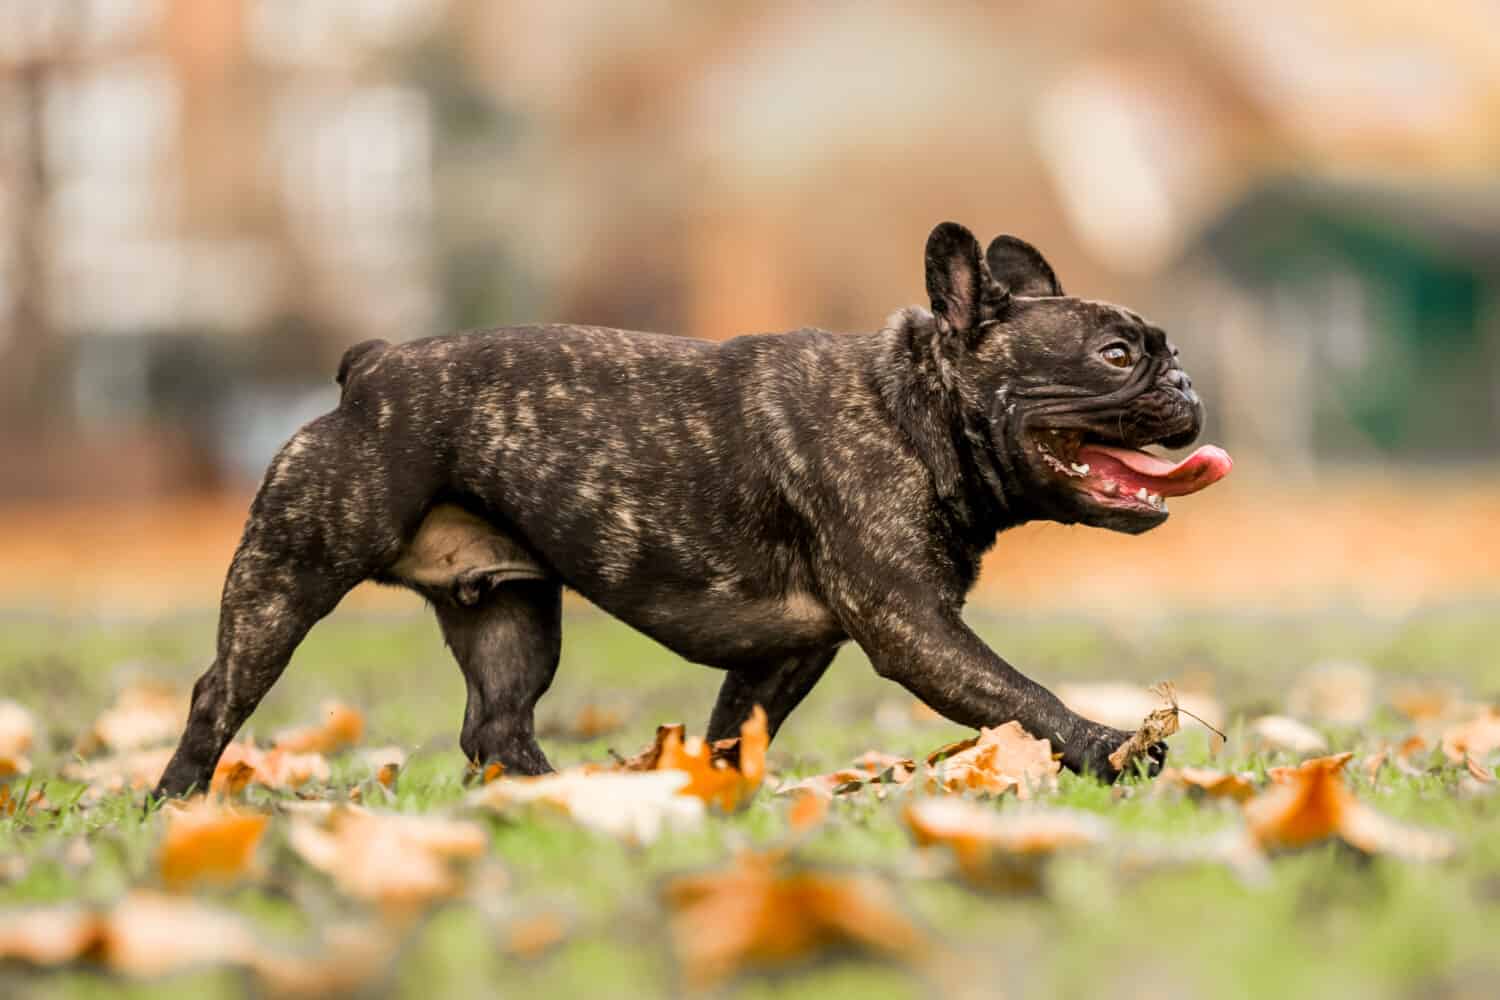 French bulldog dark running or walking with mouth open and tongue out. A young french bulldog puppy in a park, countryside meadow or field of grass. green background. clear eyes. sunny but autumn 